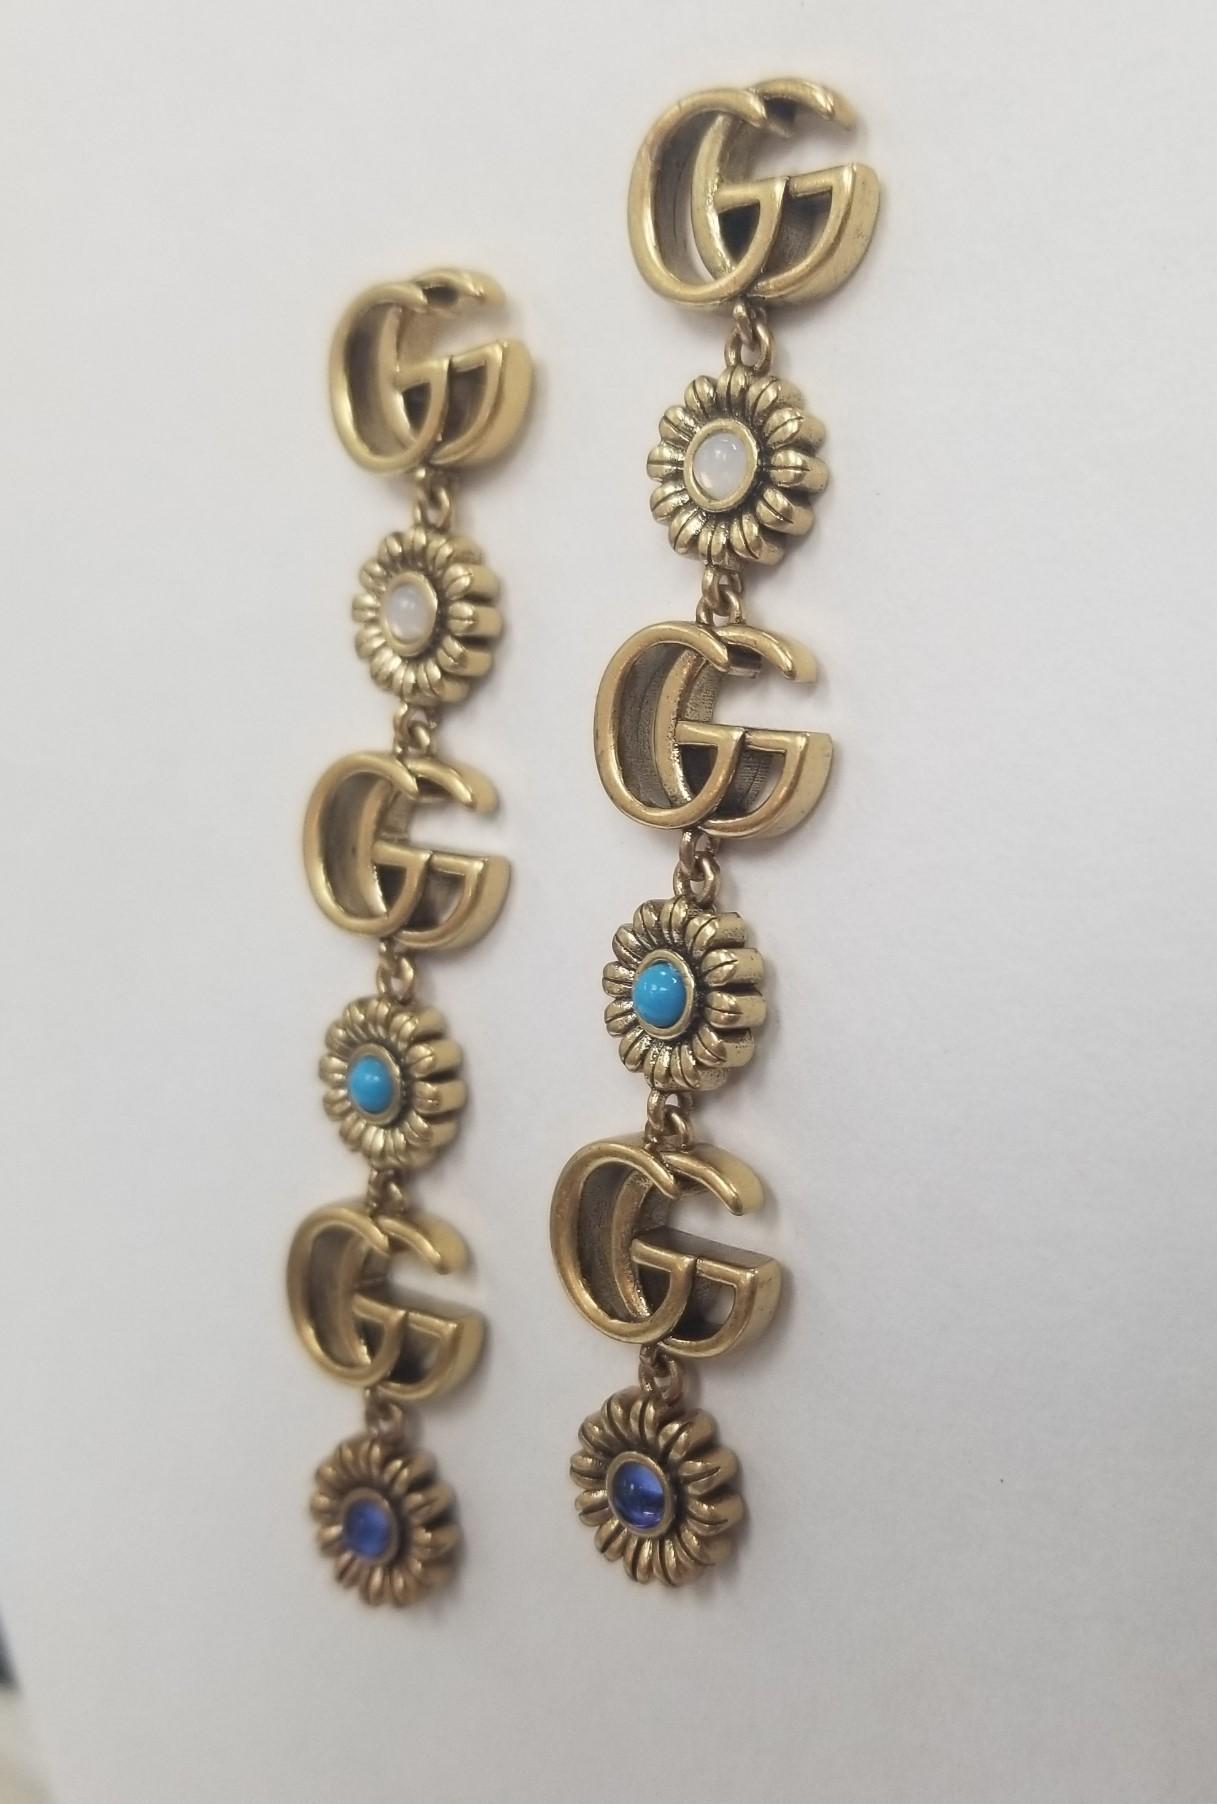 Gucci - The floral interlocked GG Bracelet on Gucci's Bracelet nods to love knots that have been used in jewelry since the ancient Egyptians as a symbol of everlasting love. It's crafted in Italy from antiqued metals.

*we have the matching